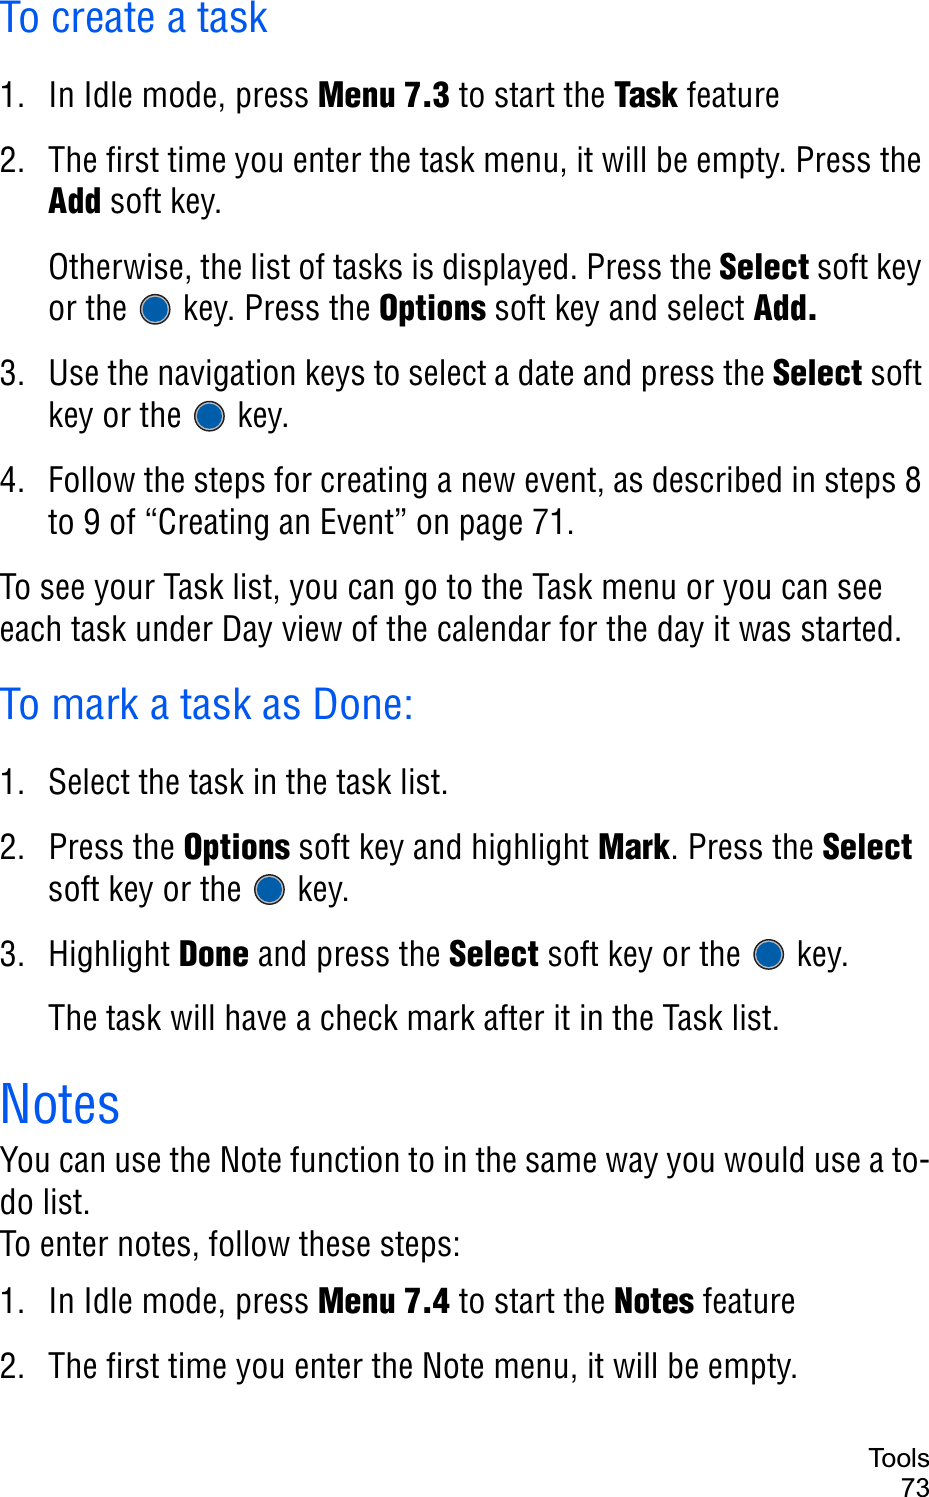 Too ls73To create a task1. In Idle mode, press Menu 7.3 to start the Task feature2. The first time you enter the task menu, it will be empty. Press the Add soft key. Otherwise, the list of tasks is displayed. Press the Select soft key or the   key. Press the Options soft key and select Add.3. Use the navigation keys to select a date and press the Select soft key or the   key.4. Follow the steps for creating a new event, as described in steps 8 to 9 of “Creating an Event” on page 71.To see your Task list, you can go to the Task menu or you can see each task under Day view of the calendar for the day it was started.To mark a task as Done:1. Select the task in the task list.2. Press the Options soft key and highlight Mark. Press the Selectsoft key or the   key.3. Highlight Done and press the Select soft key or the   key.The task will have a check mark after it in the Task list.NotesYou can use the Note function to in the same way you would use a to-do list. To enter notes, follow these steps:1. In Idle mode, press Menu 7.4 to start the Notes feature2. The first time you enter the Note menu, it will be empty. 